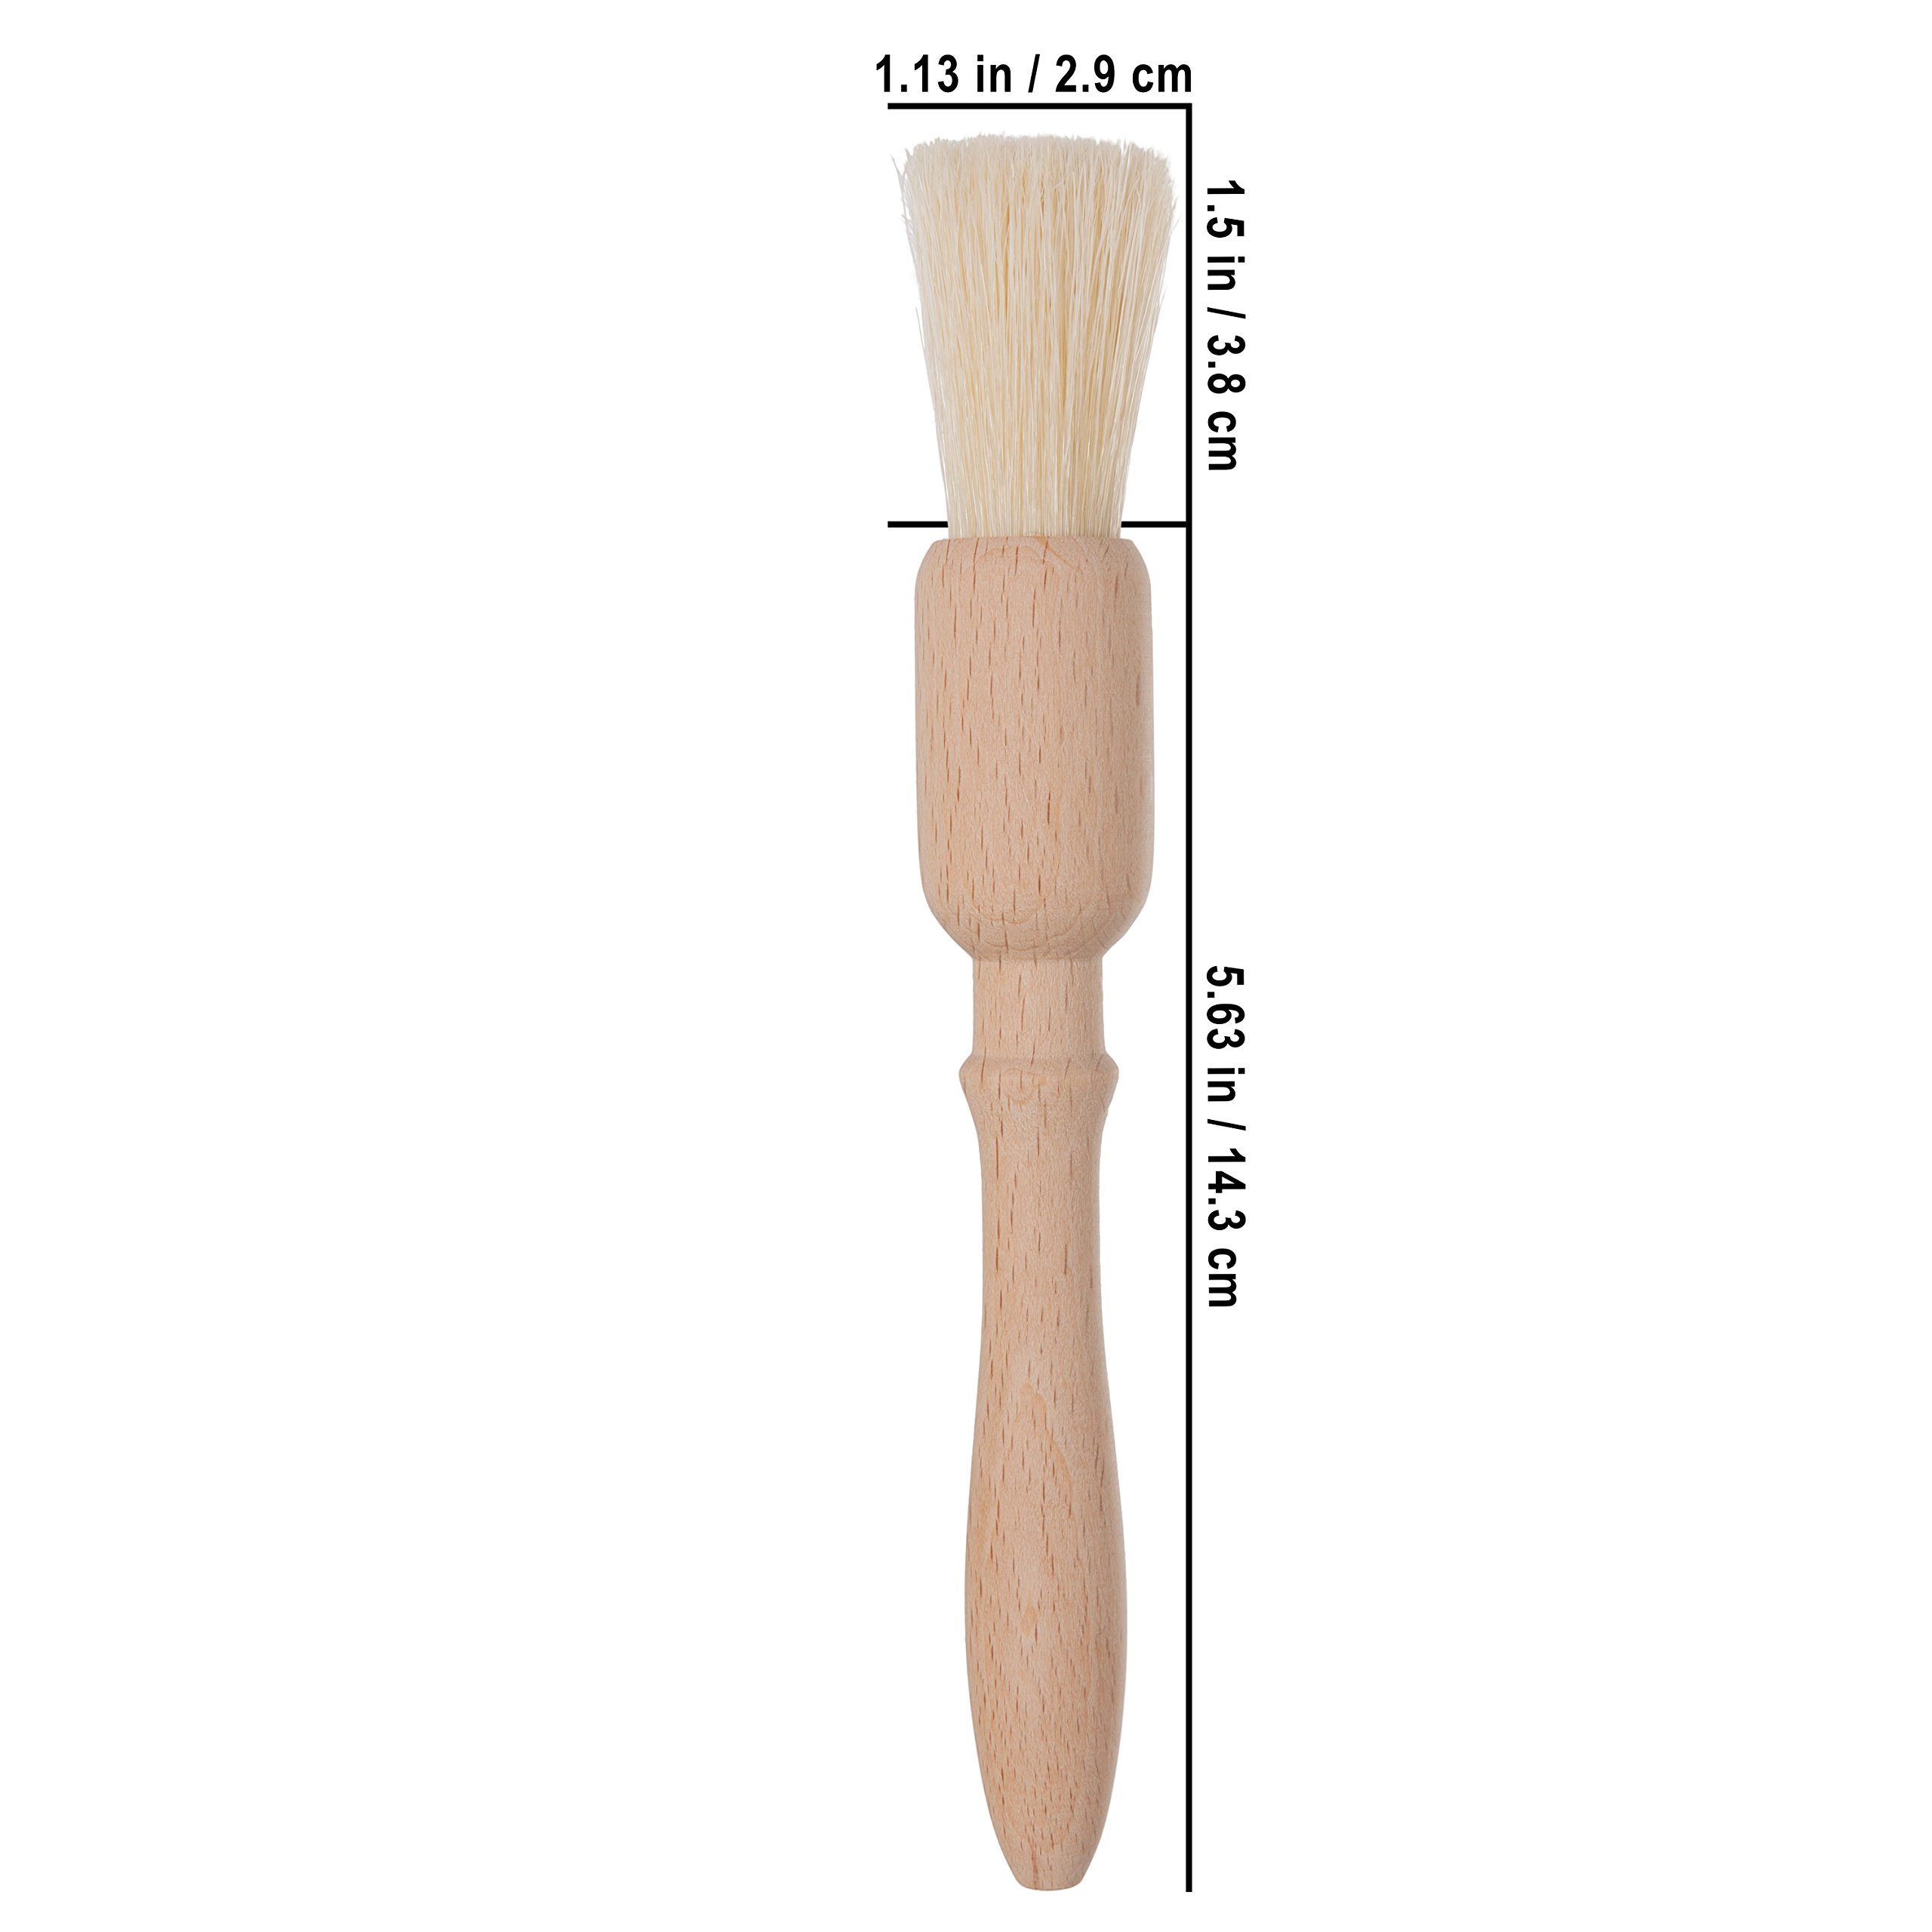 Redecker Natural Pig Bristle Pastry Brush with Untreated Beechwood Handle, Ideal for Basting, Glazing and Applying Eggwash, 7-1/4 inches, Made in Germany